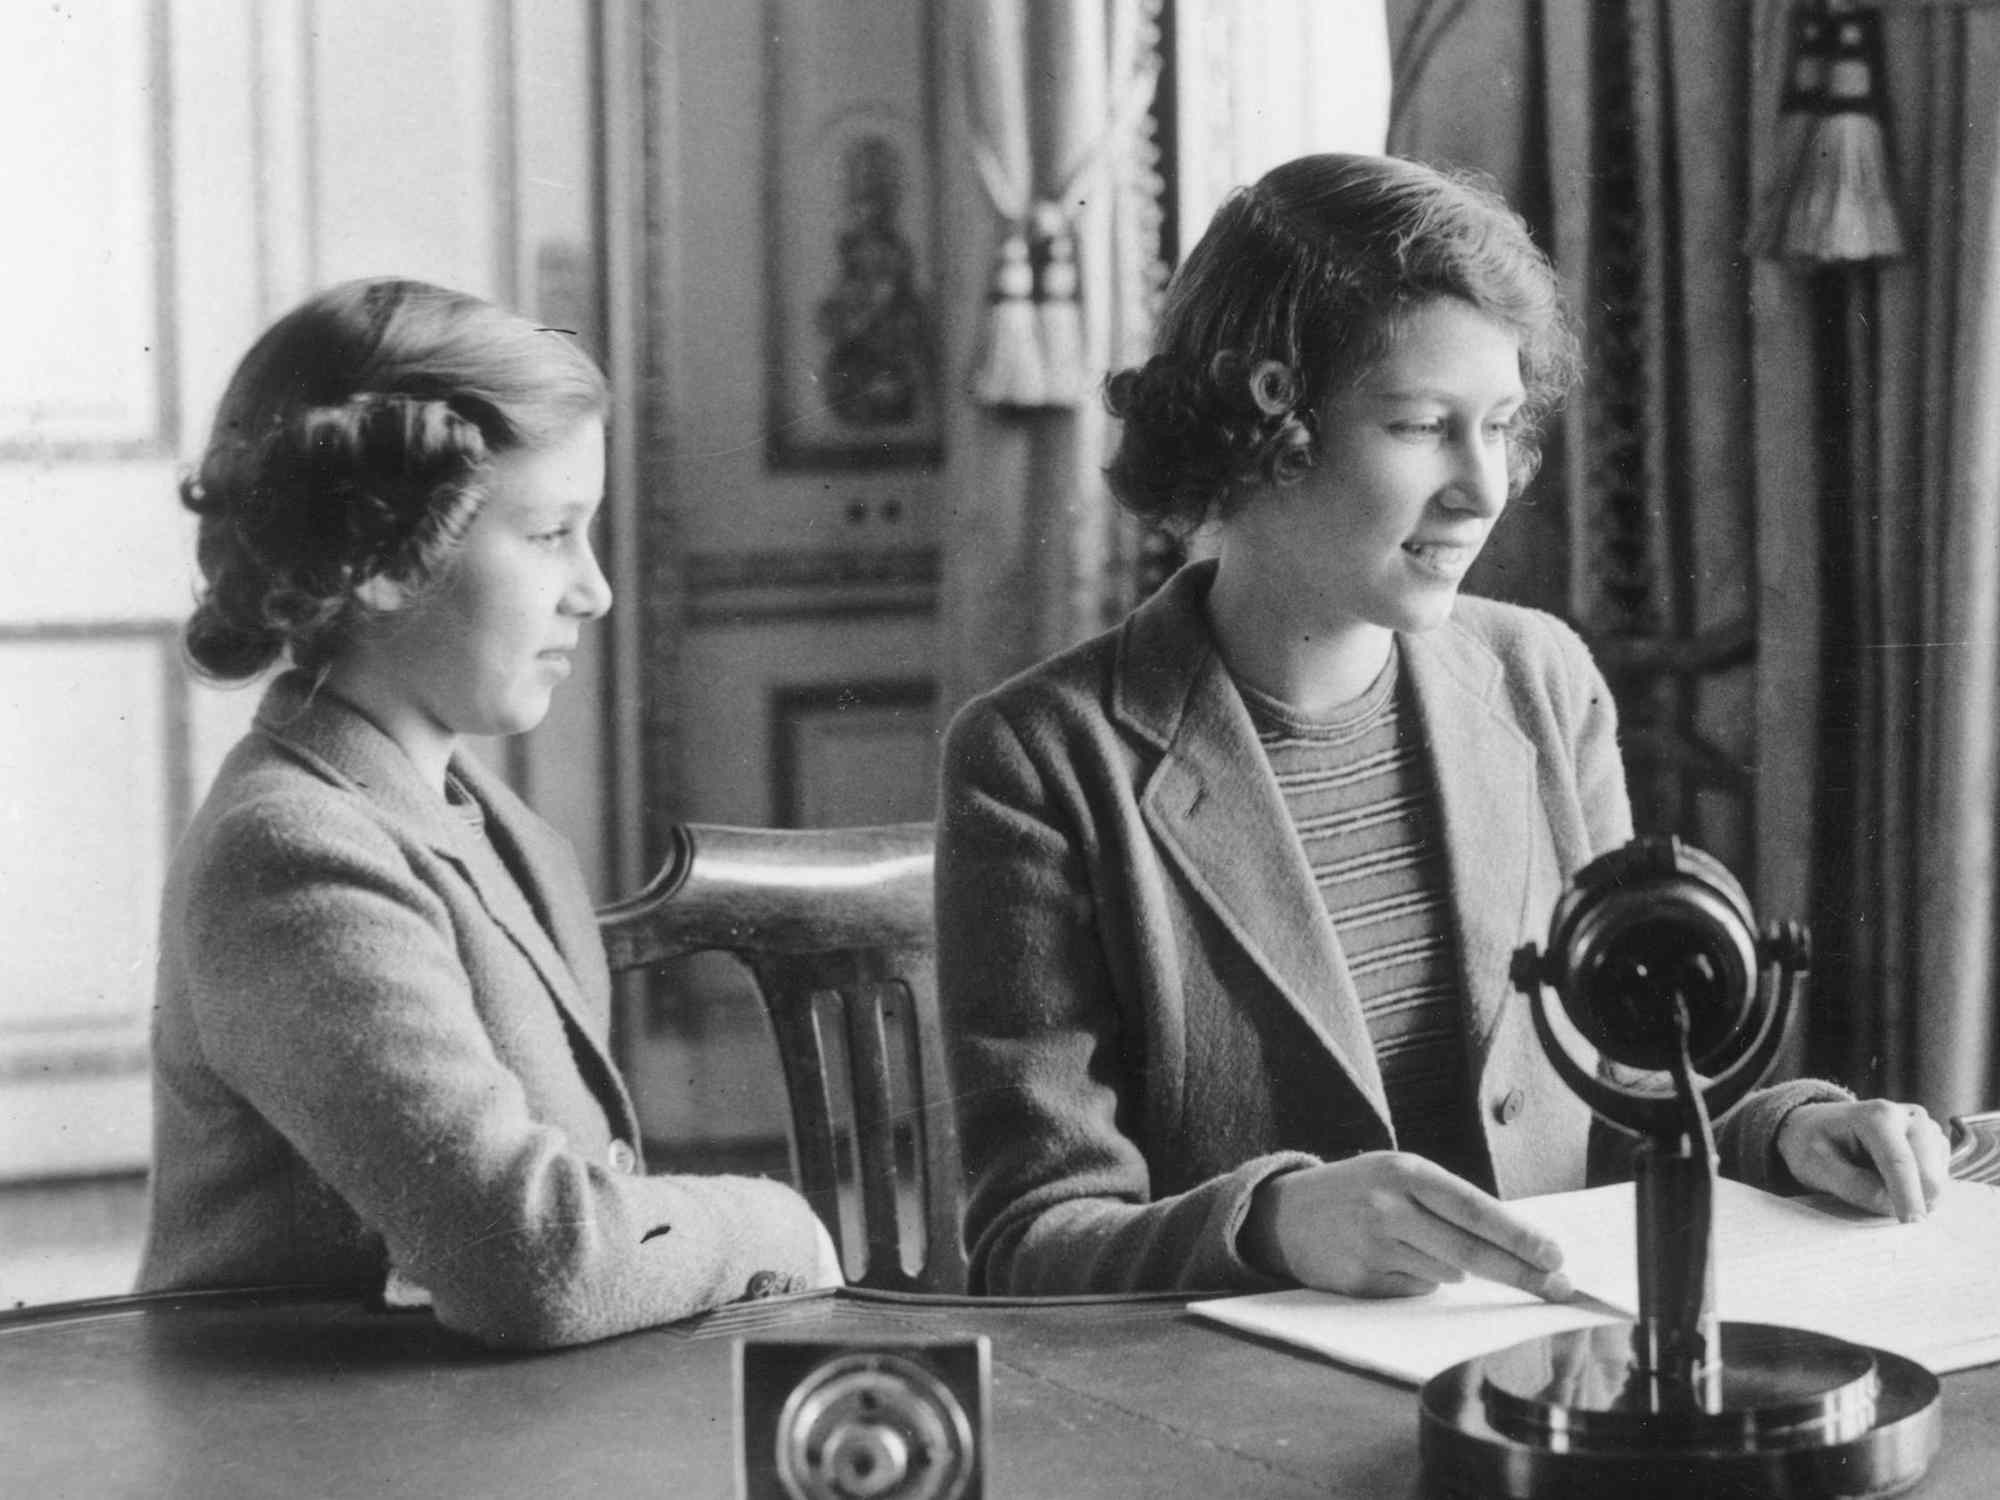 Princess Elizabeth makes her first broadcast, accompanied by her younger sister Princess Margaret Rose October 12, 1940 in London. Buckingham Palace announced that Princess Margaret died peacefully in her sleep at 1:30AM EST at the King Edward VII Hospital February 9, 2002 in London